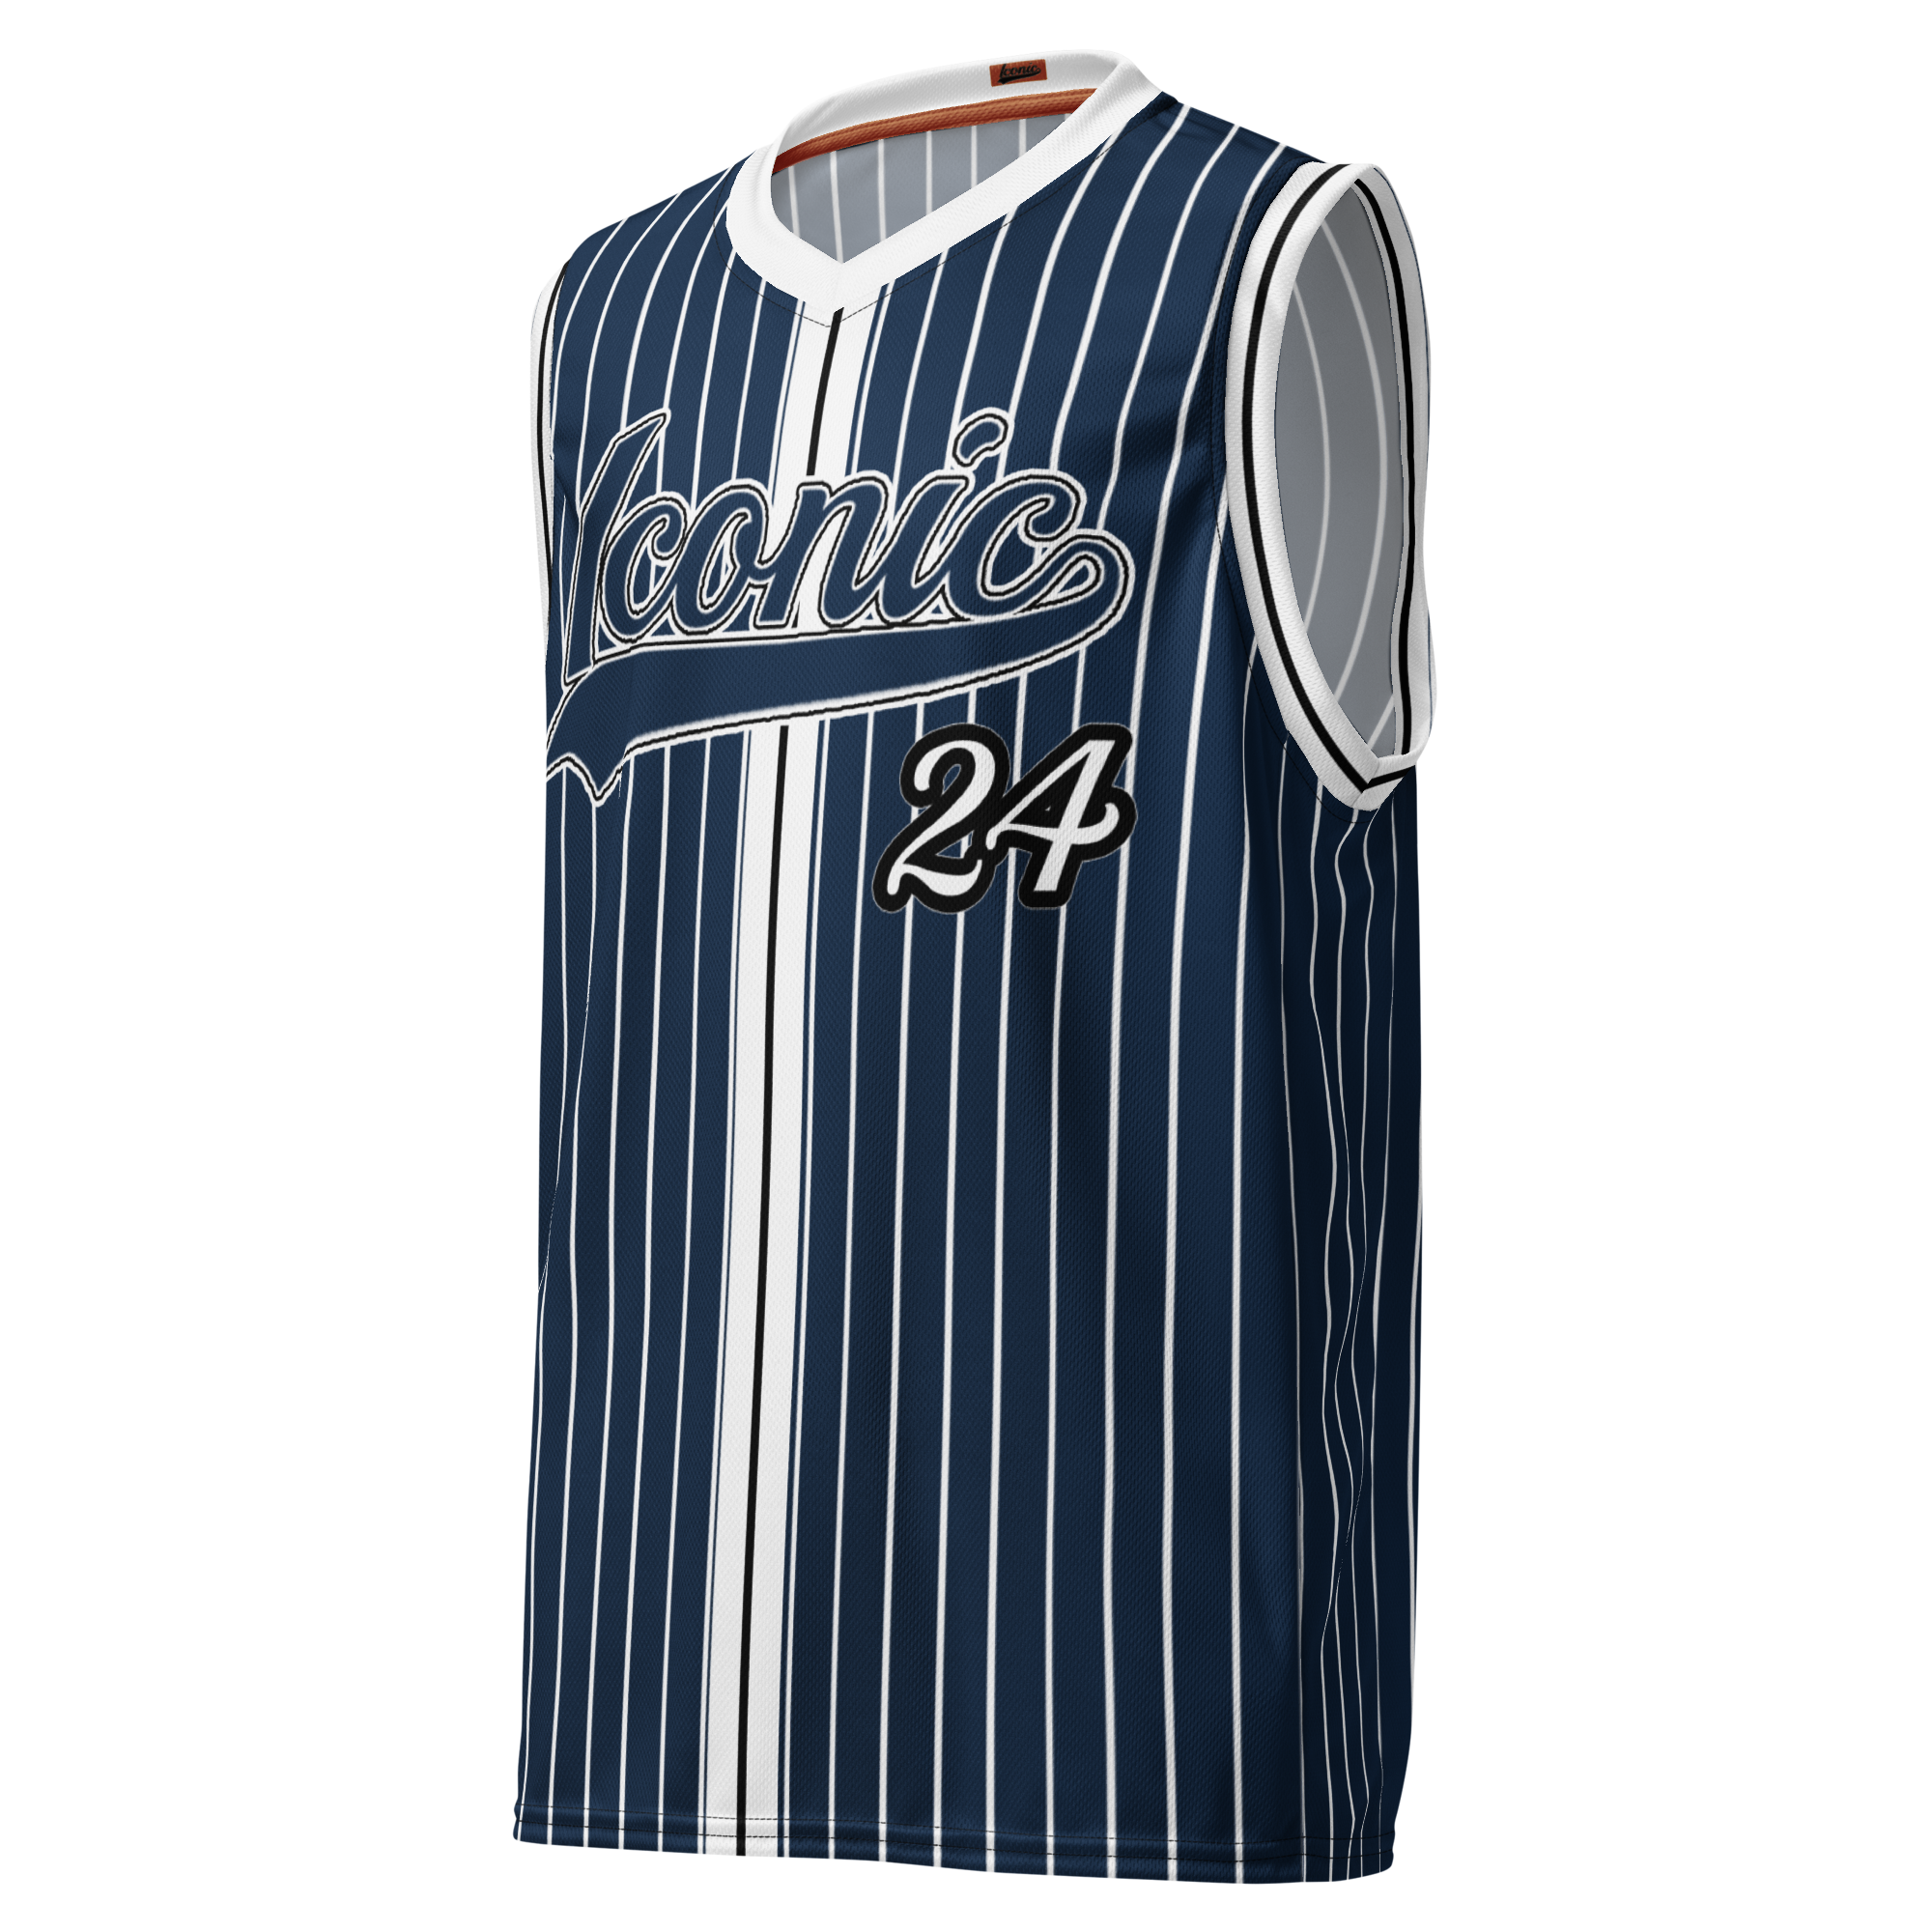 ROYAL Team Iconic. unisex basketball jersey Pinstripe Navy and Wh